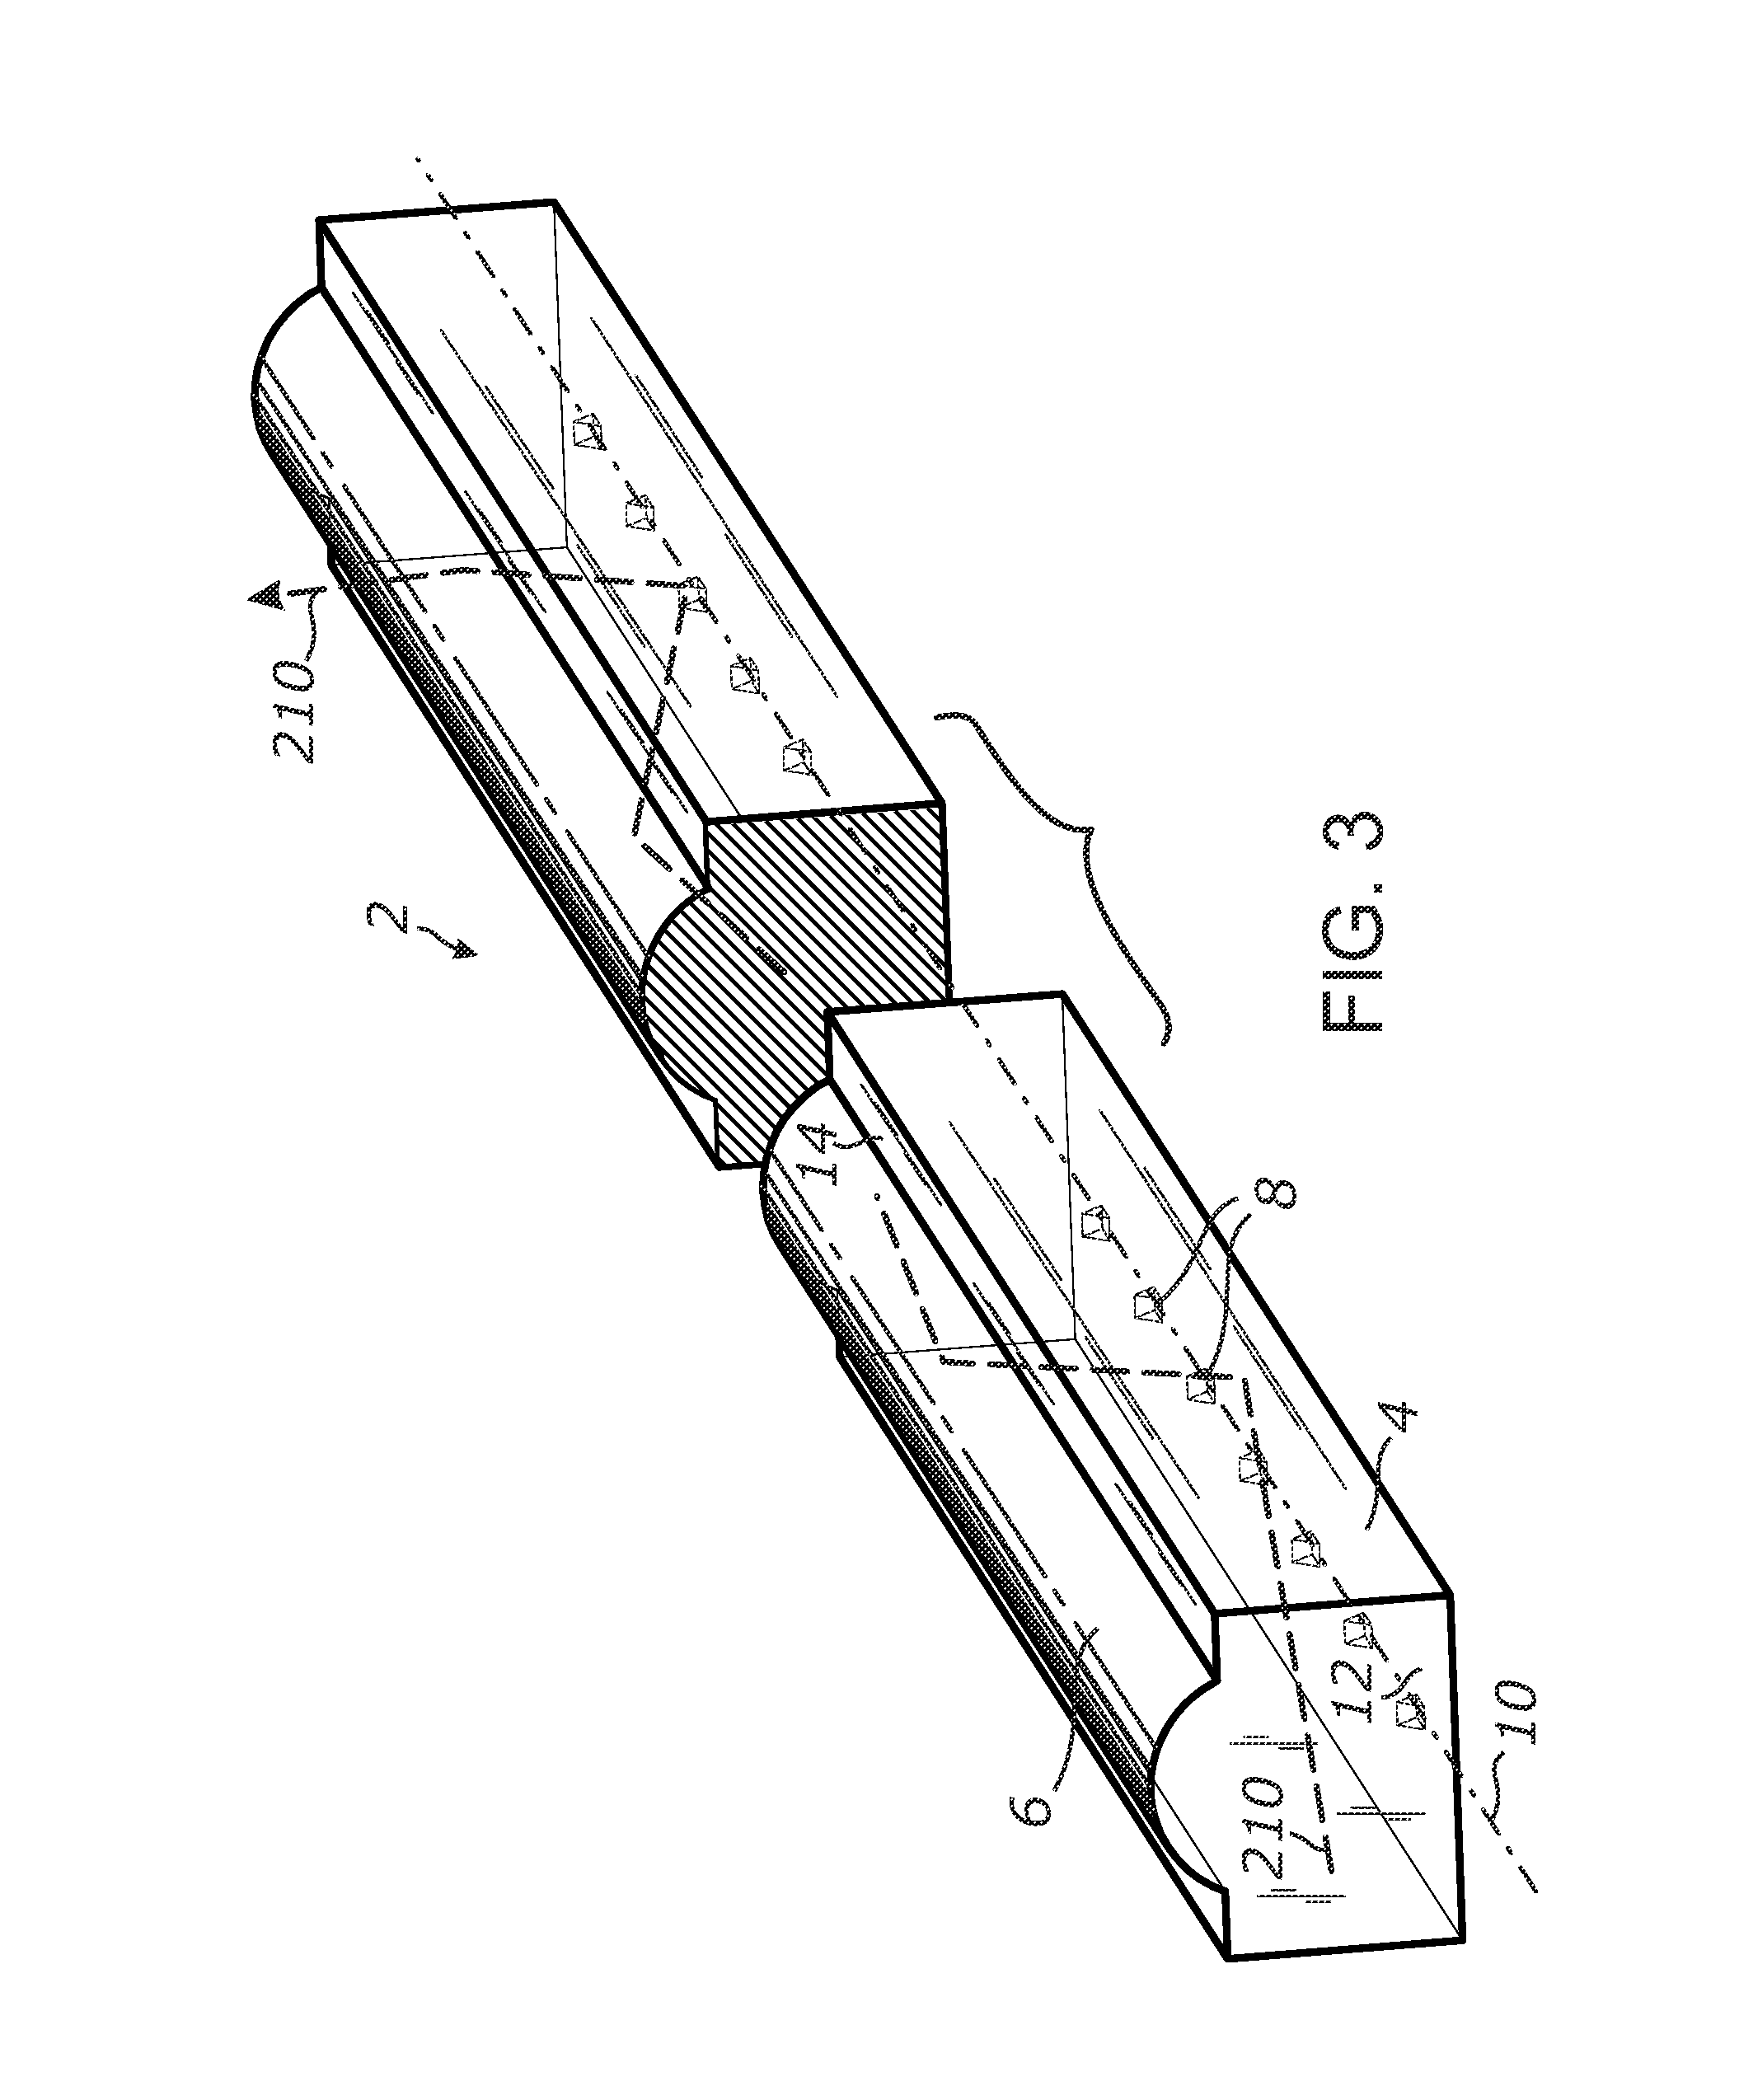 Collimating illumination systems employing a waveguide